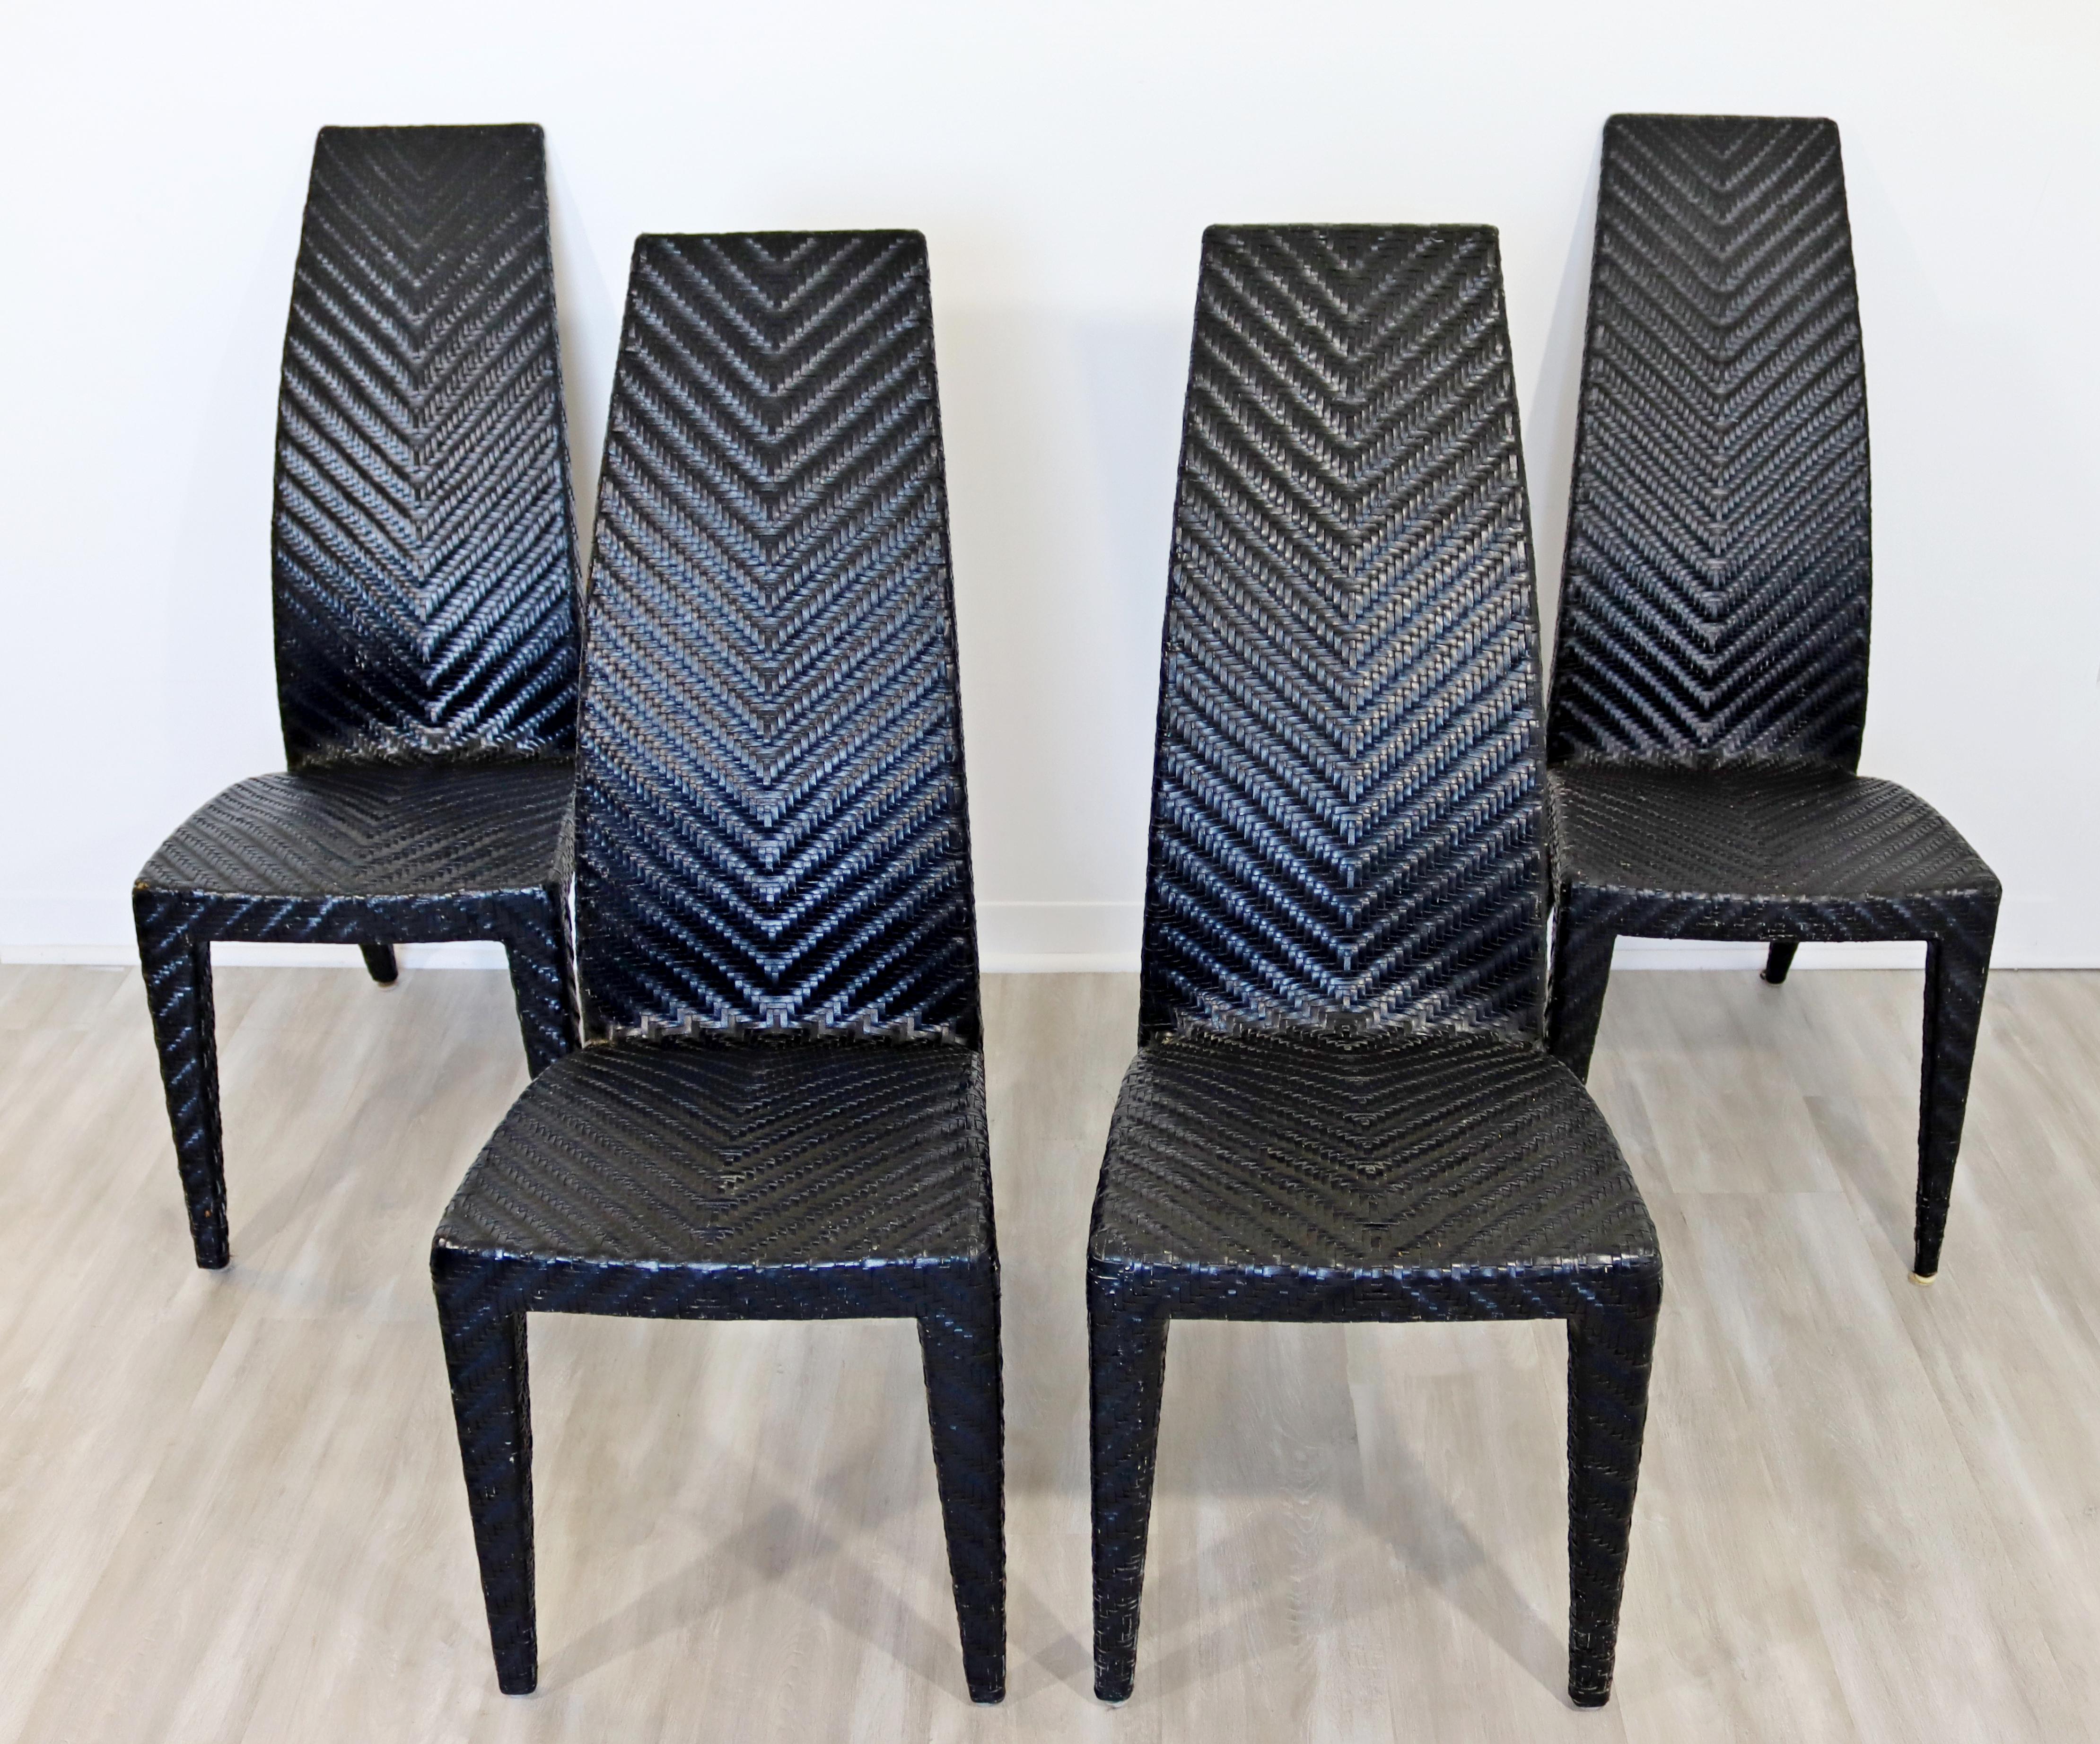 For your consideration is a marvelous set of four, black rattan, side dining chairs, in the Gazelle style, circa the 1980s. In very good vintage condition. The dimensions are 17